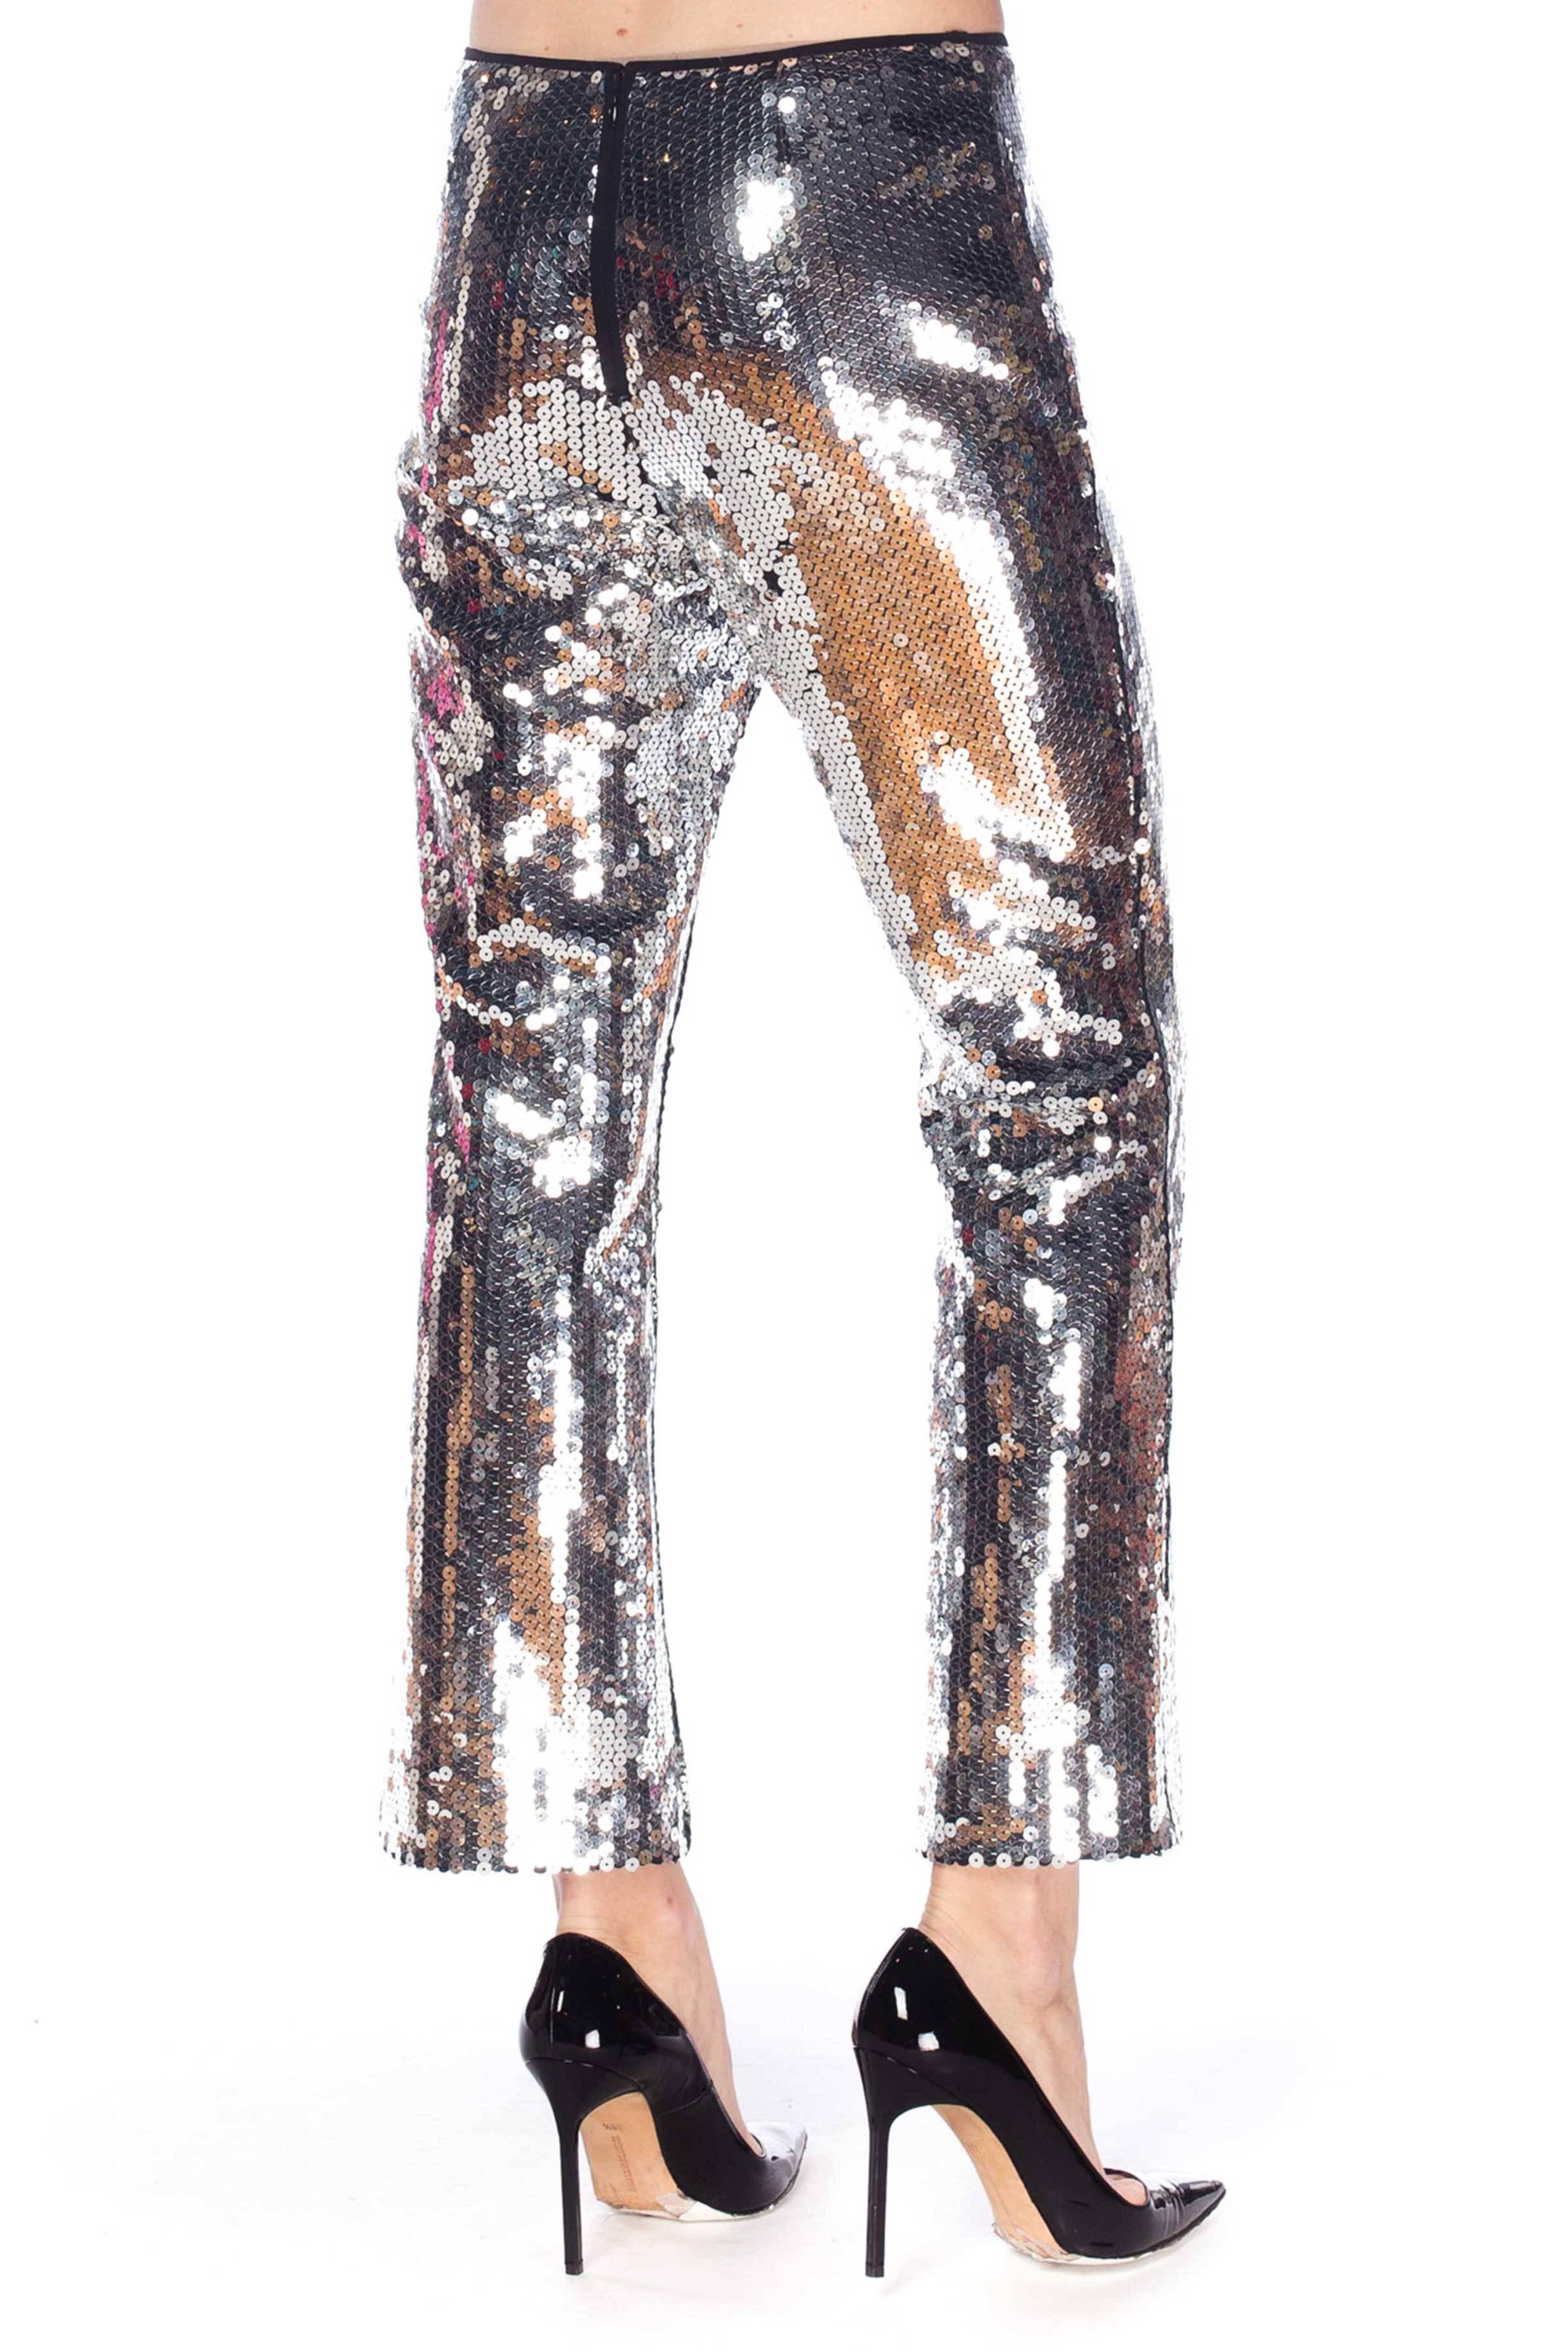 Dolce & Gabbana Silver Metallic Sequined Low-Rise Pants 1